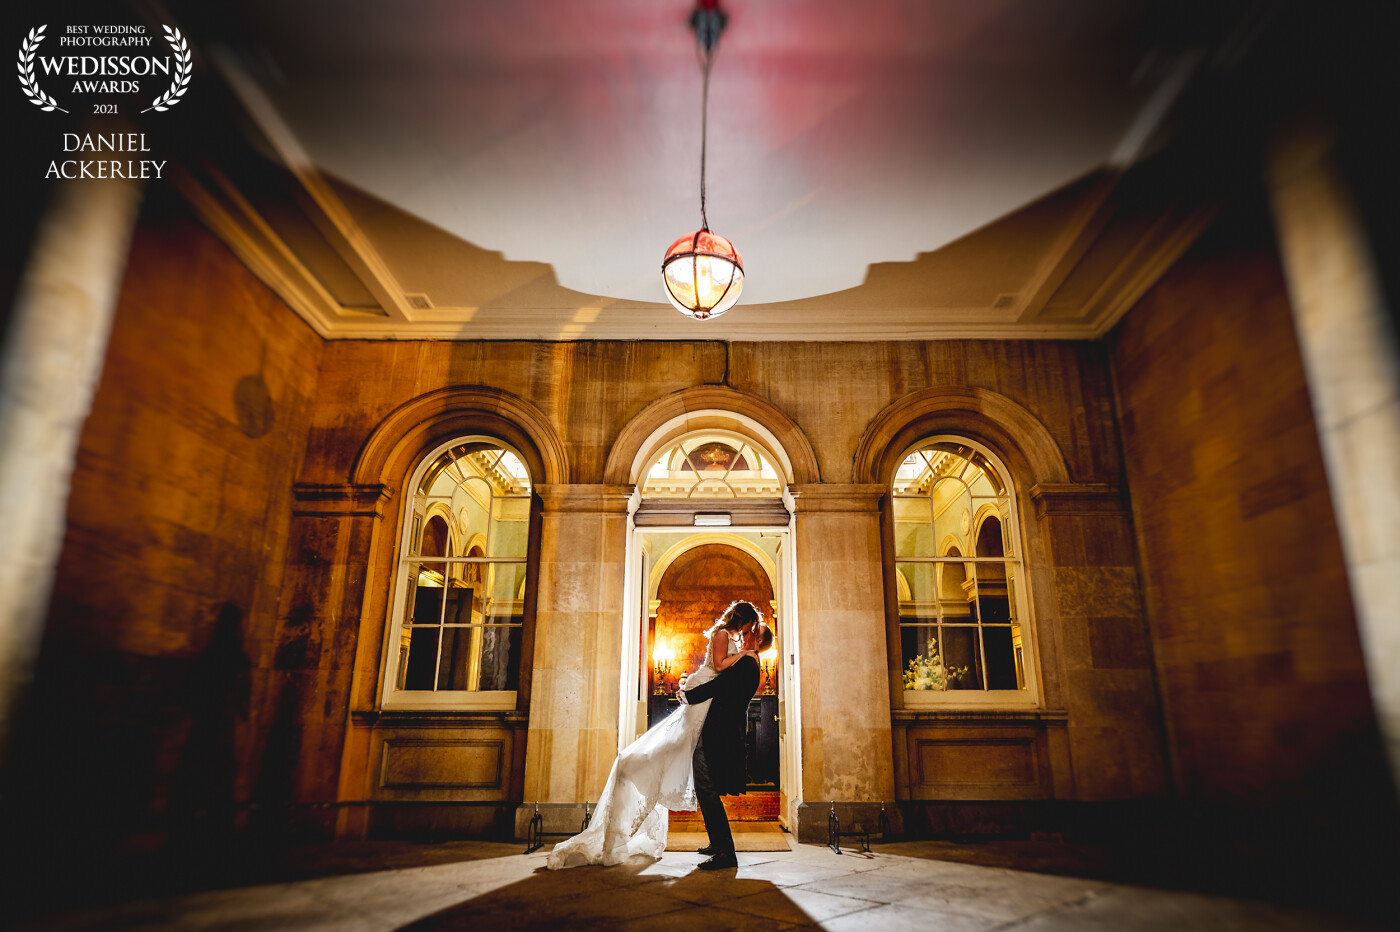 Nicola and Andrew had an amazing day, the weather was poor though, so after waiting as long as we could to get a sunset that didn't happen, we decided instead to get creative and use some off camera flash and this awesome venue door to get something romantic and dramatic.